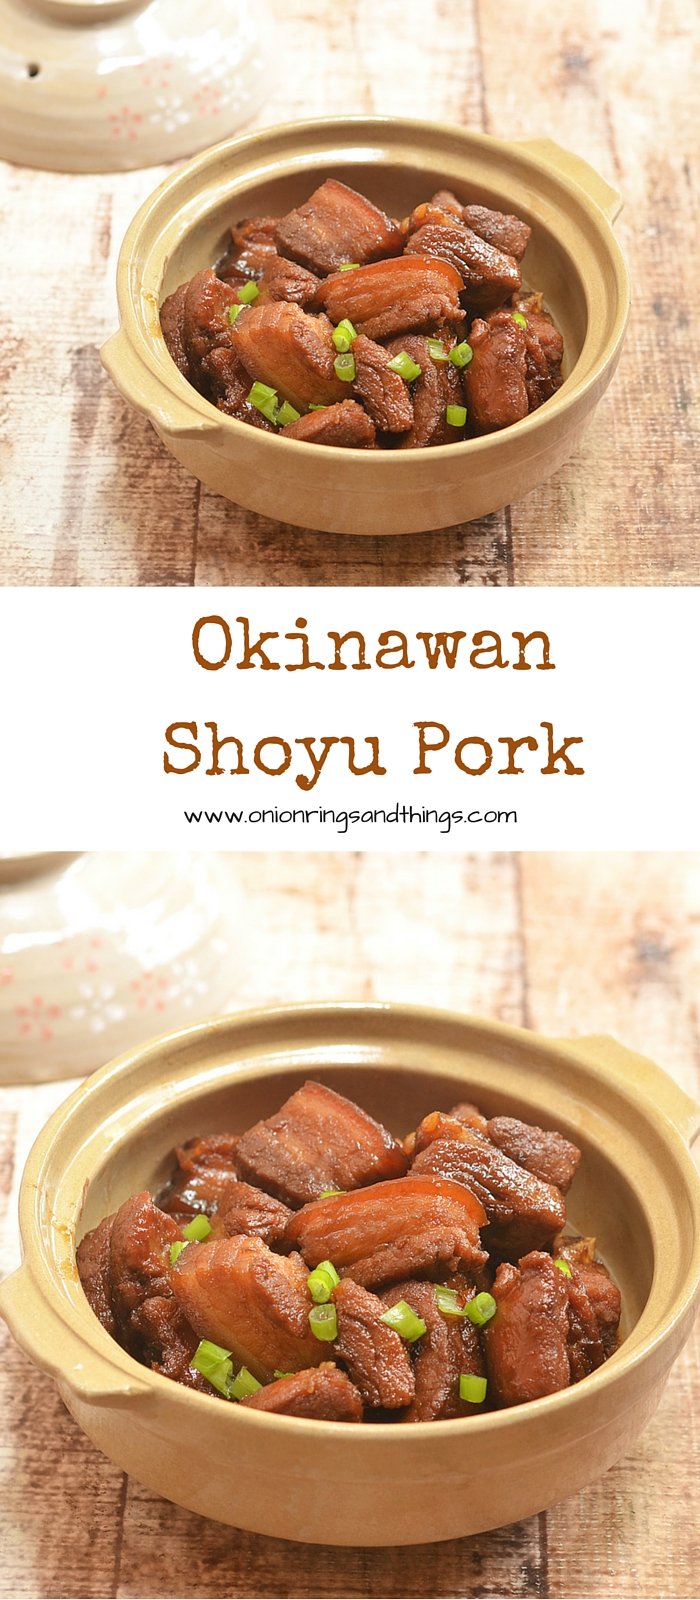 Okinawan shoyu pork is a traditional Okinawan dish where pork belly is slowly braised in a mixture of soy sauce, sake, mirin, brown sugar and ginger until melt-in-your-mouth tender and flavorful